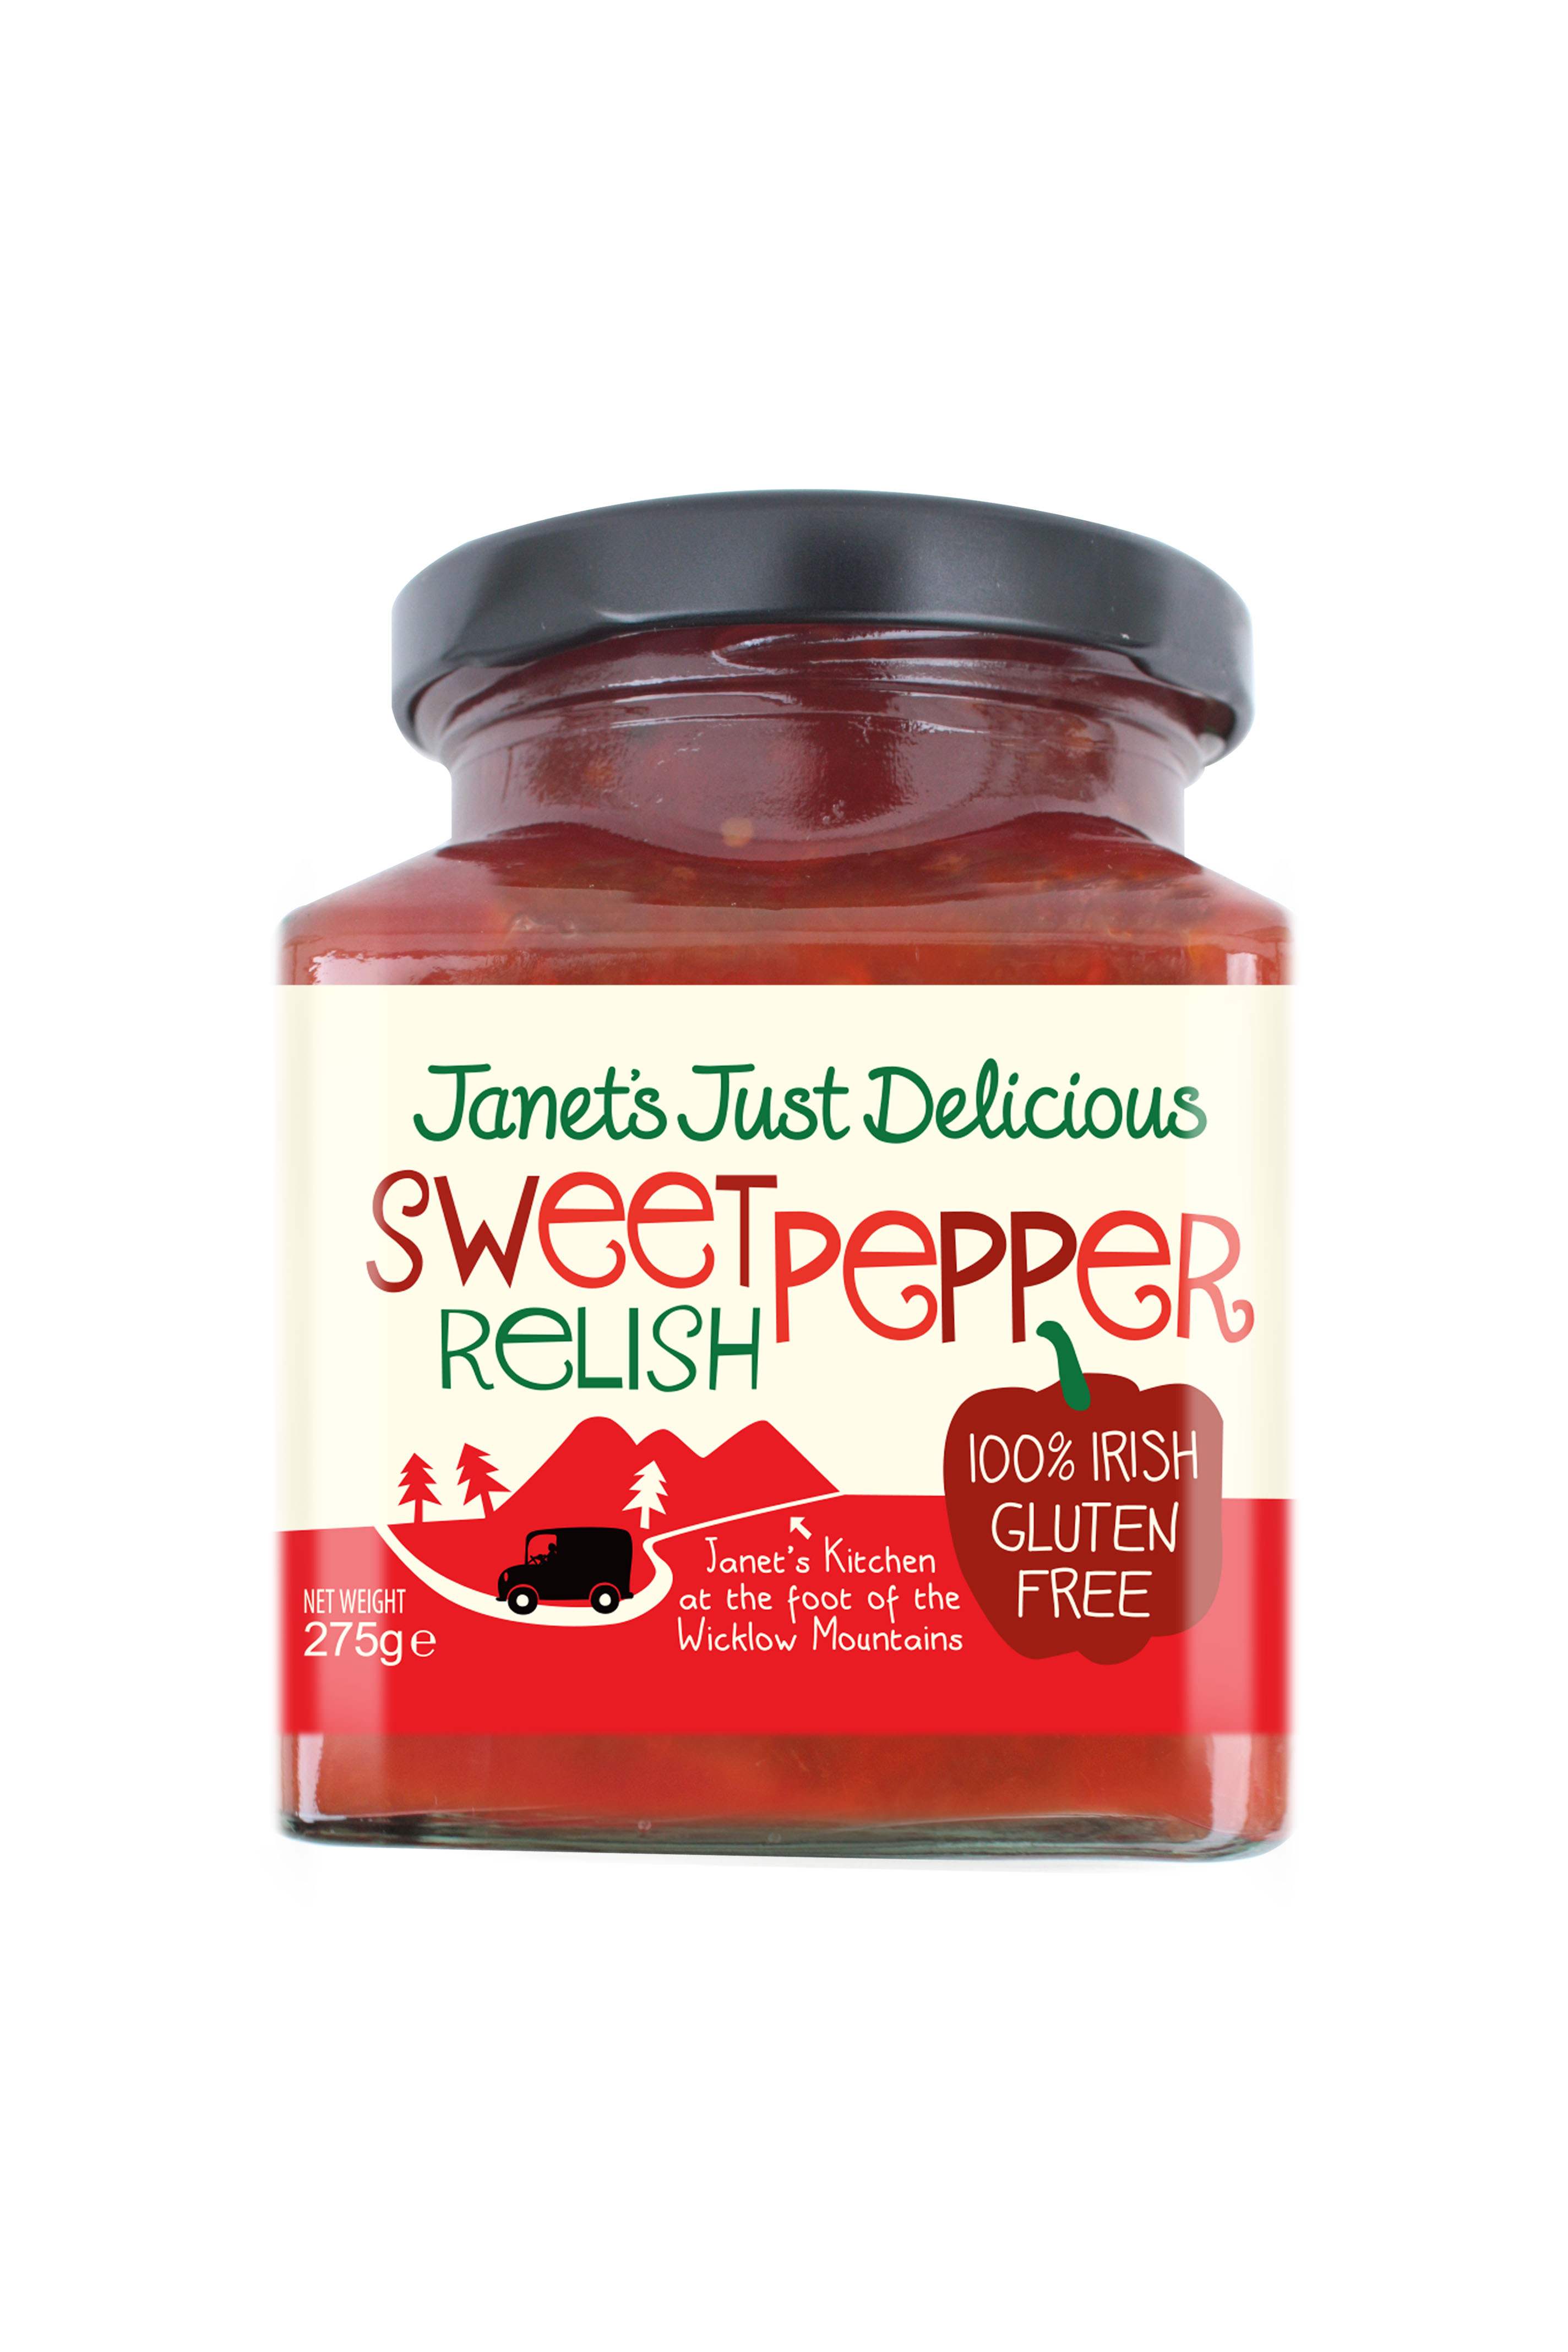 JJD 2016 Sweet Pepper Relish - Janets Country Fayre